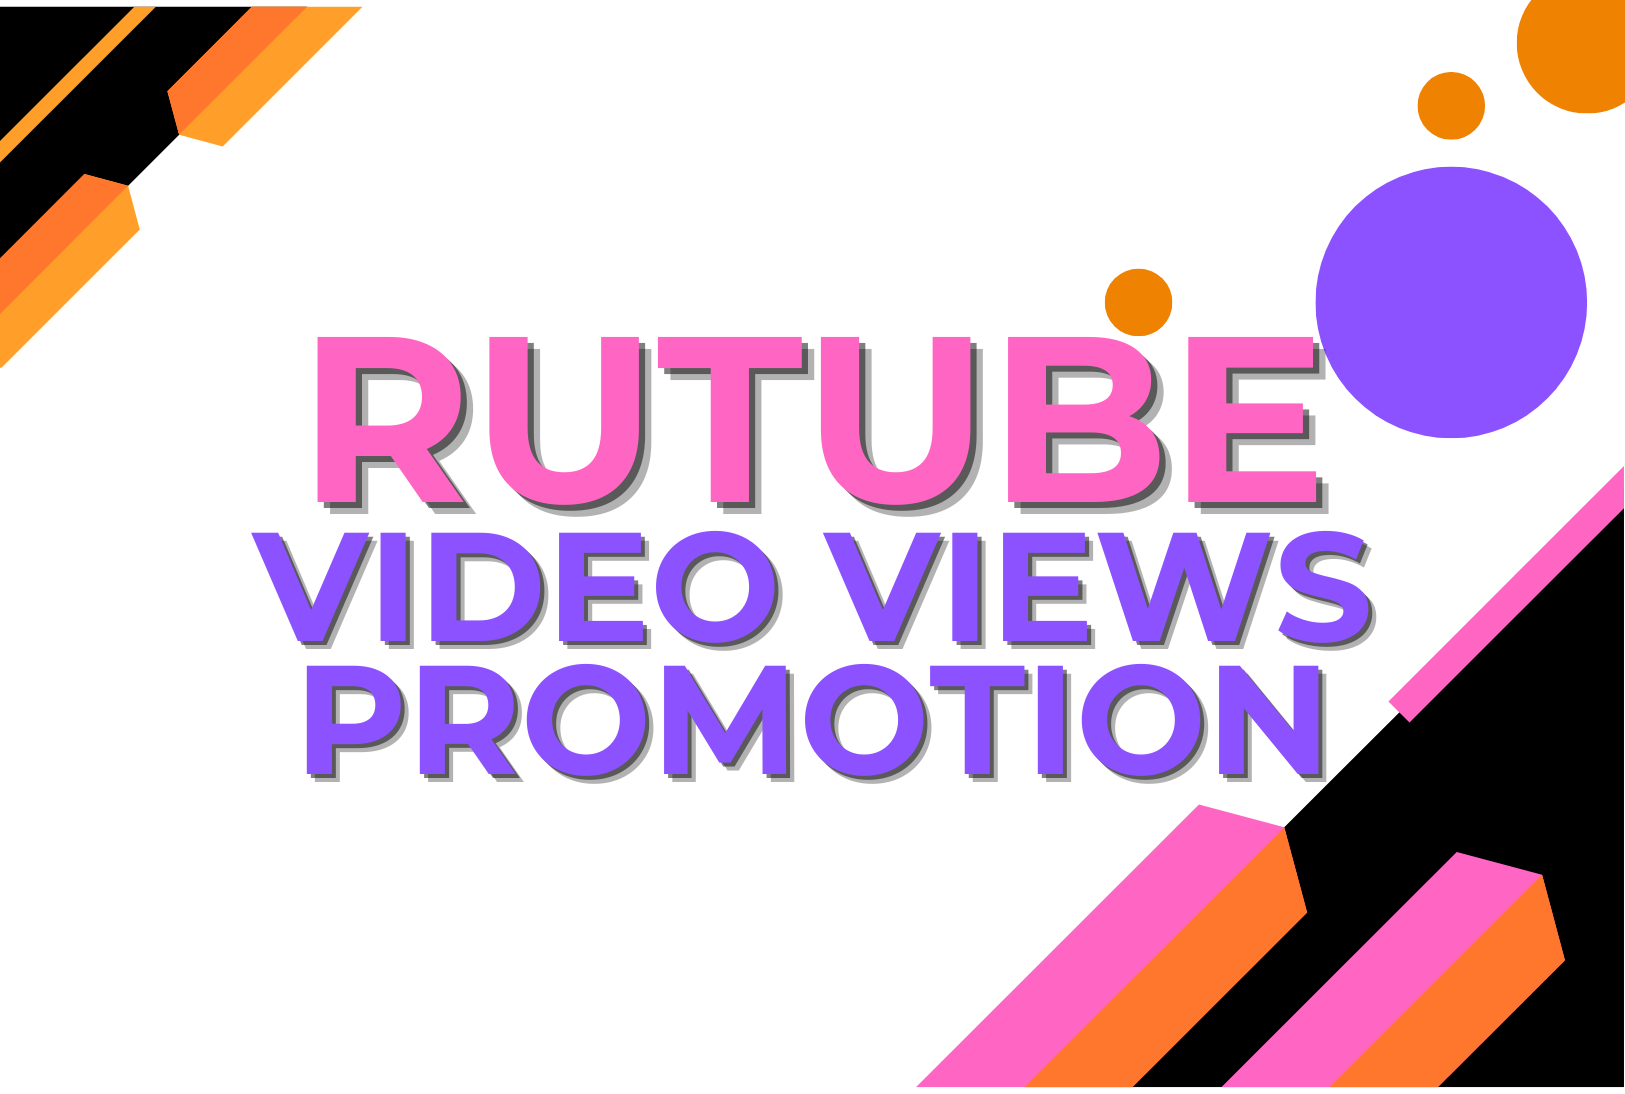 Add 1000 Views on Rutube video for promotion